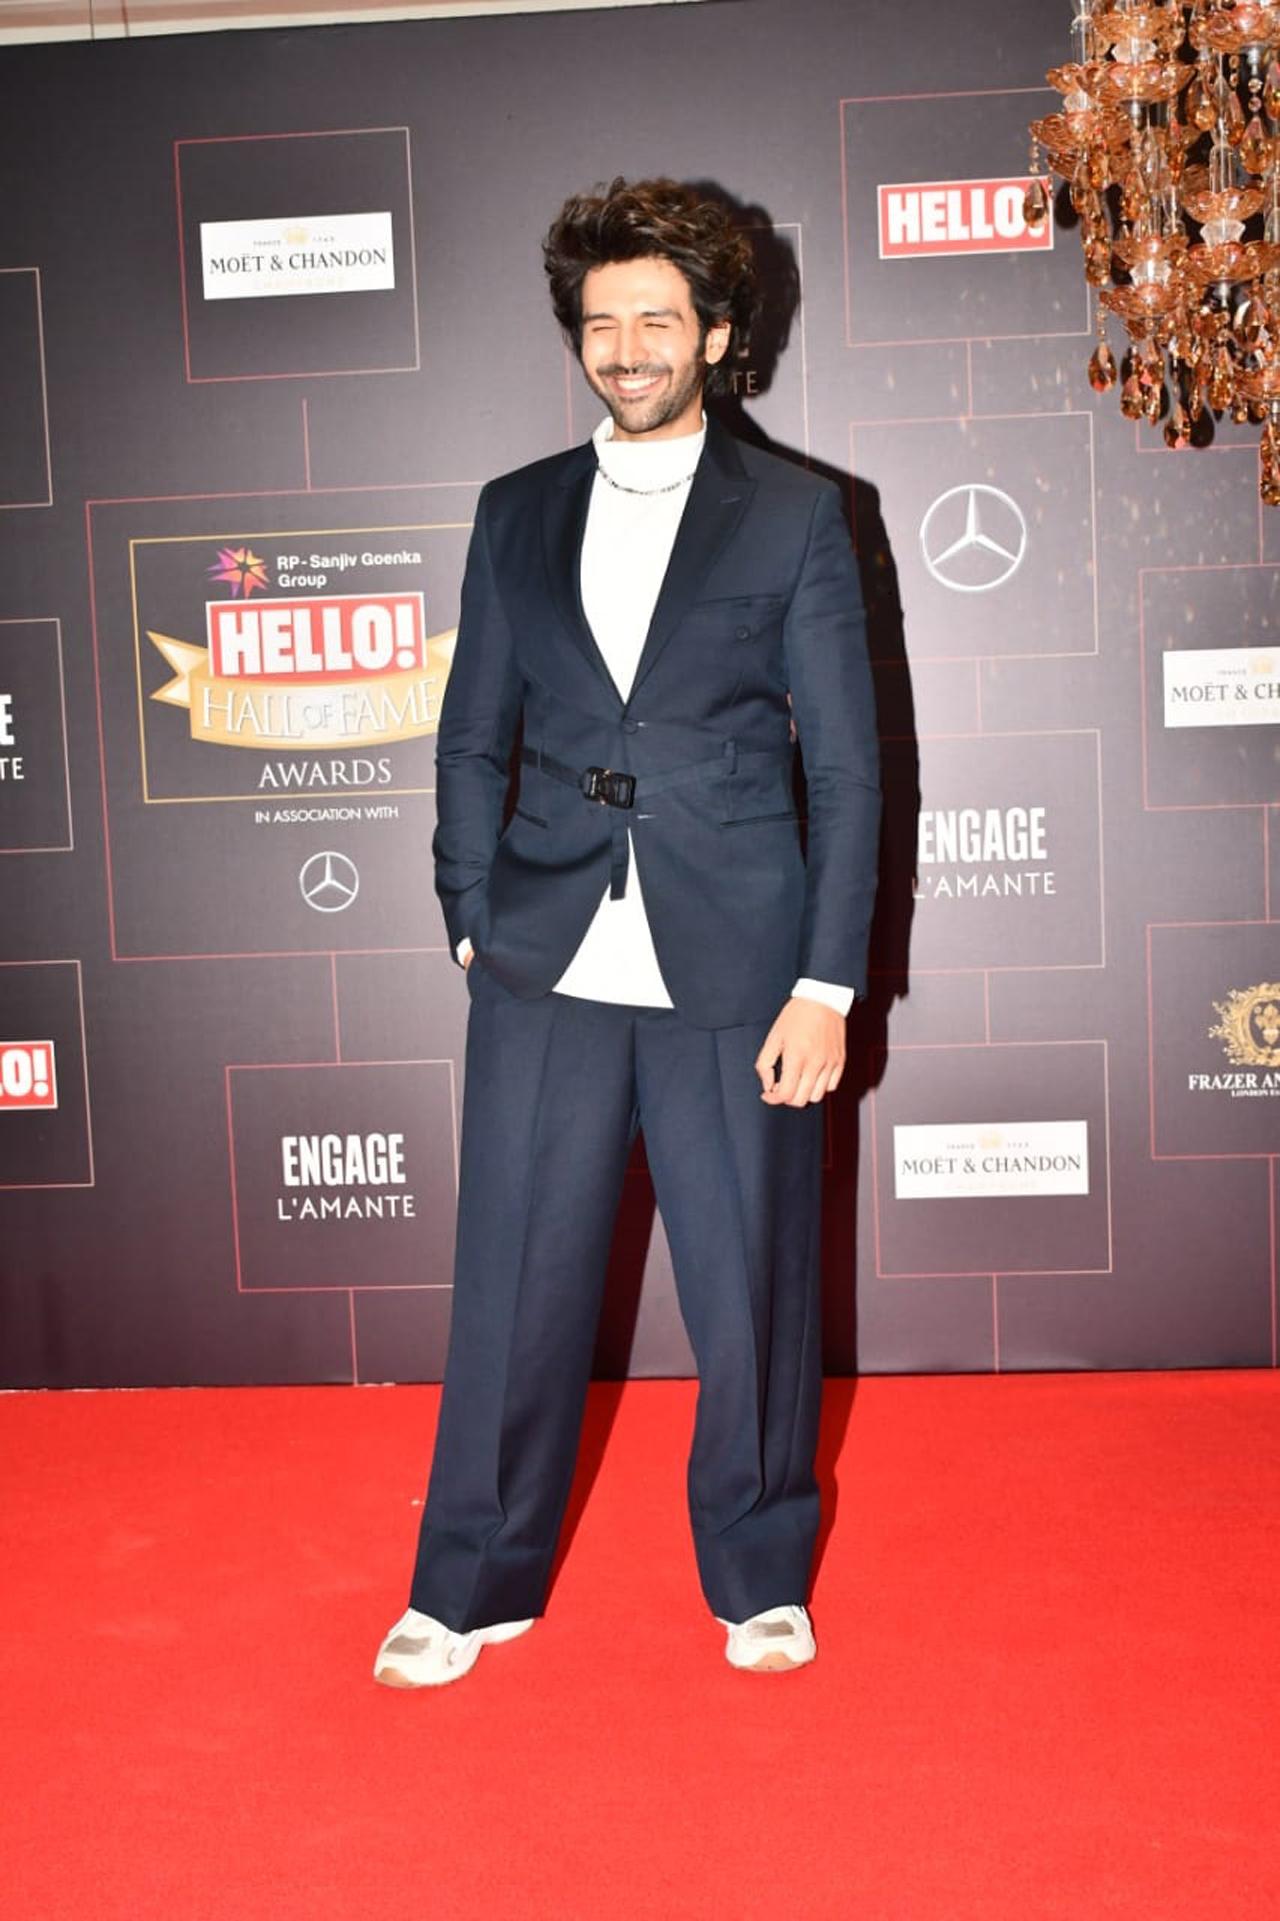 Kartik Aaryan stunned in a blue Dior suit as he walked the red carpet in his all charming way.